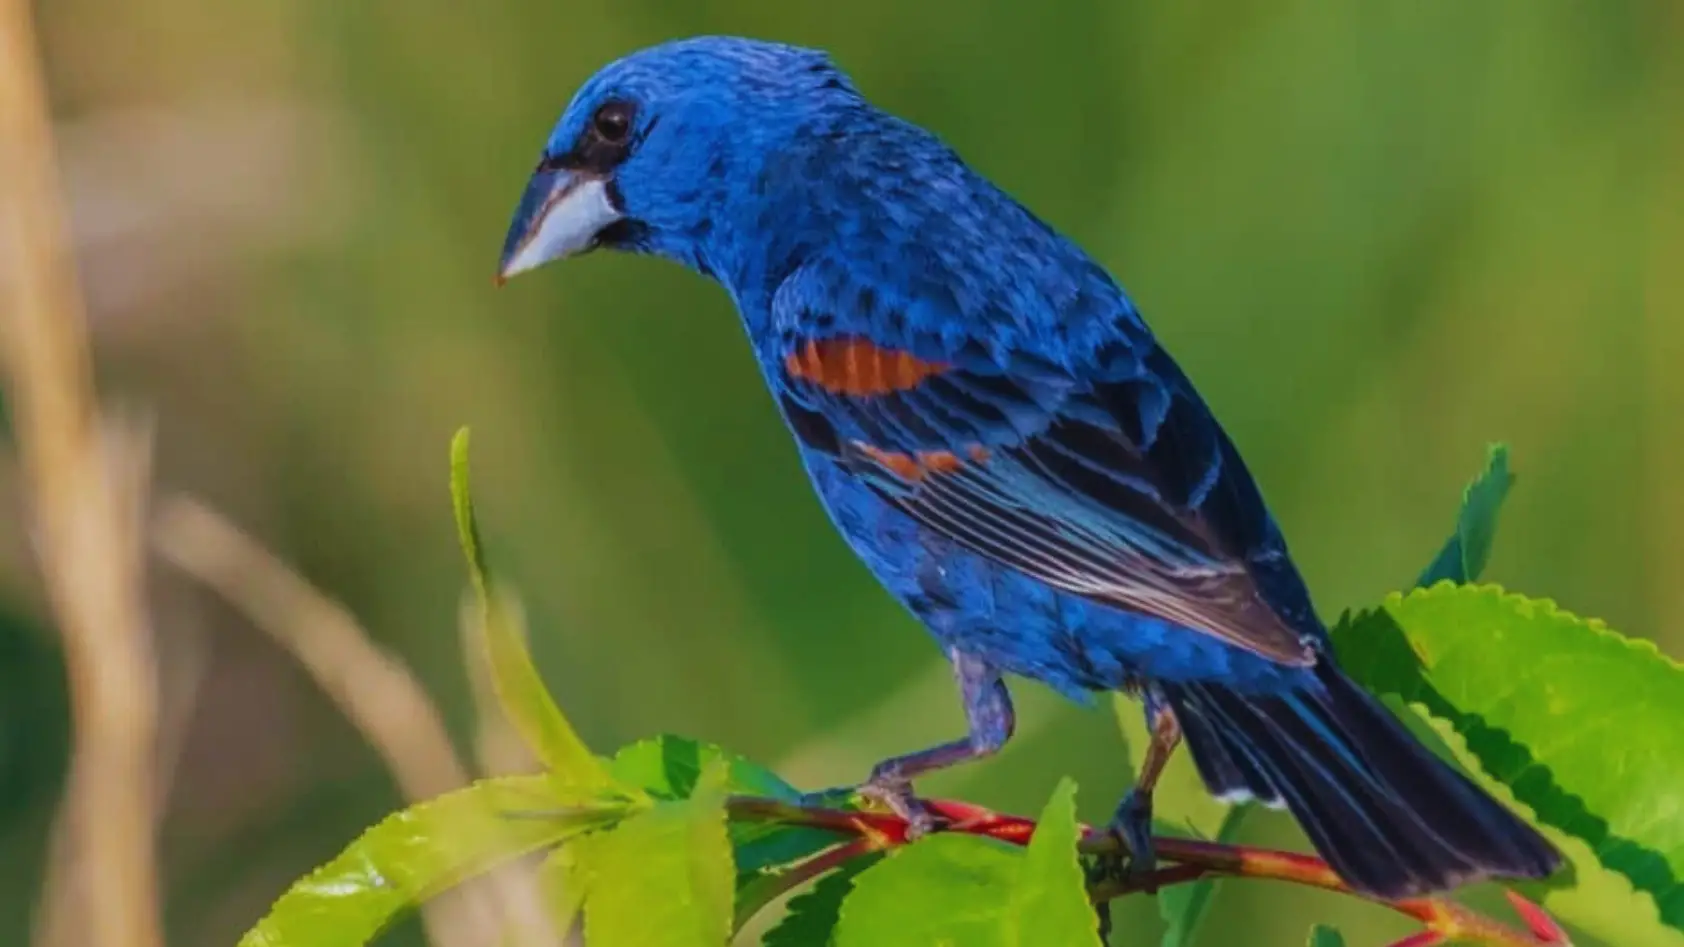 Discover the delightful world of small birds in Alabama.